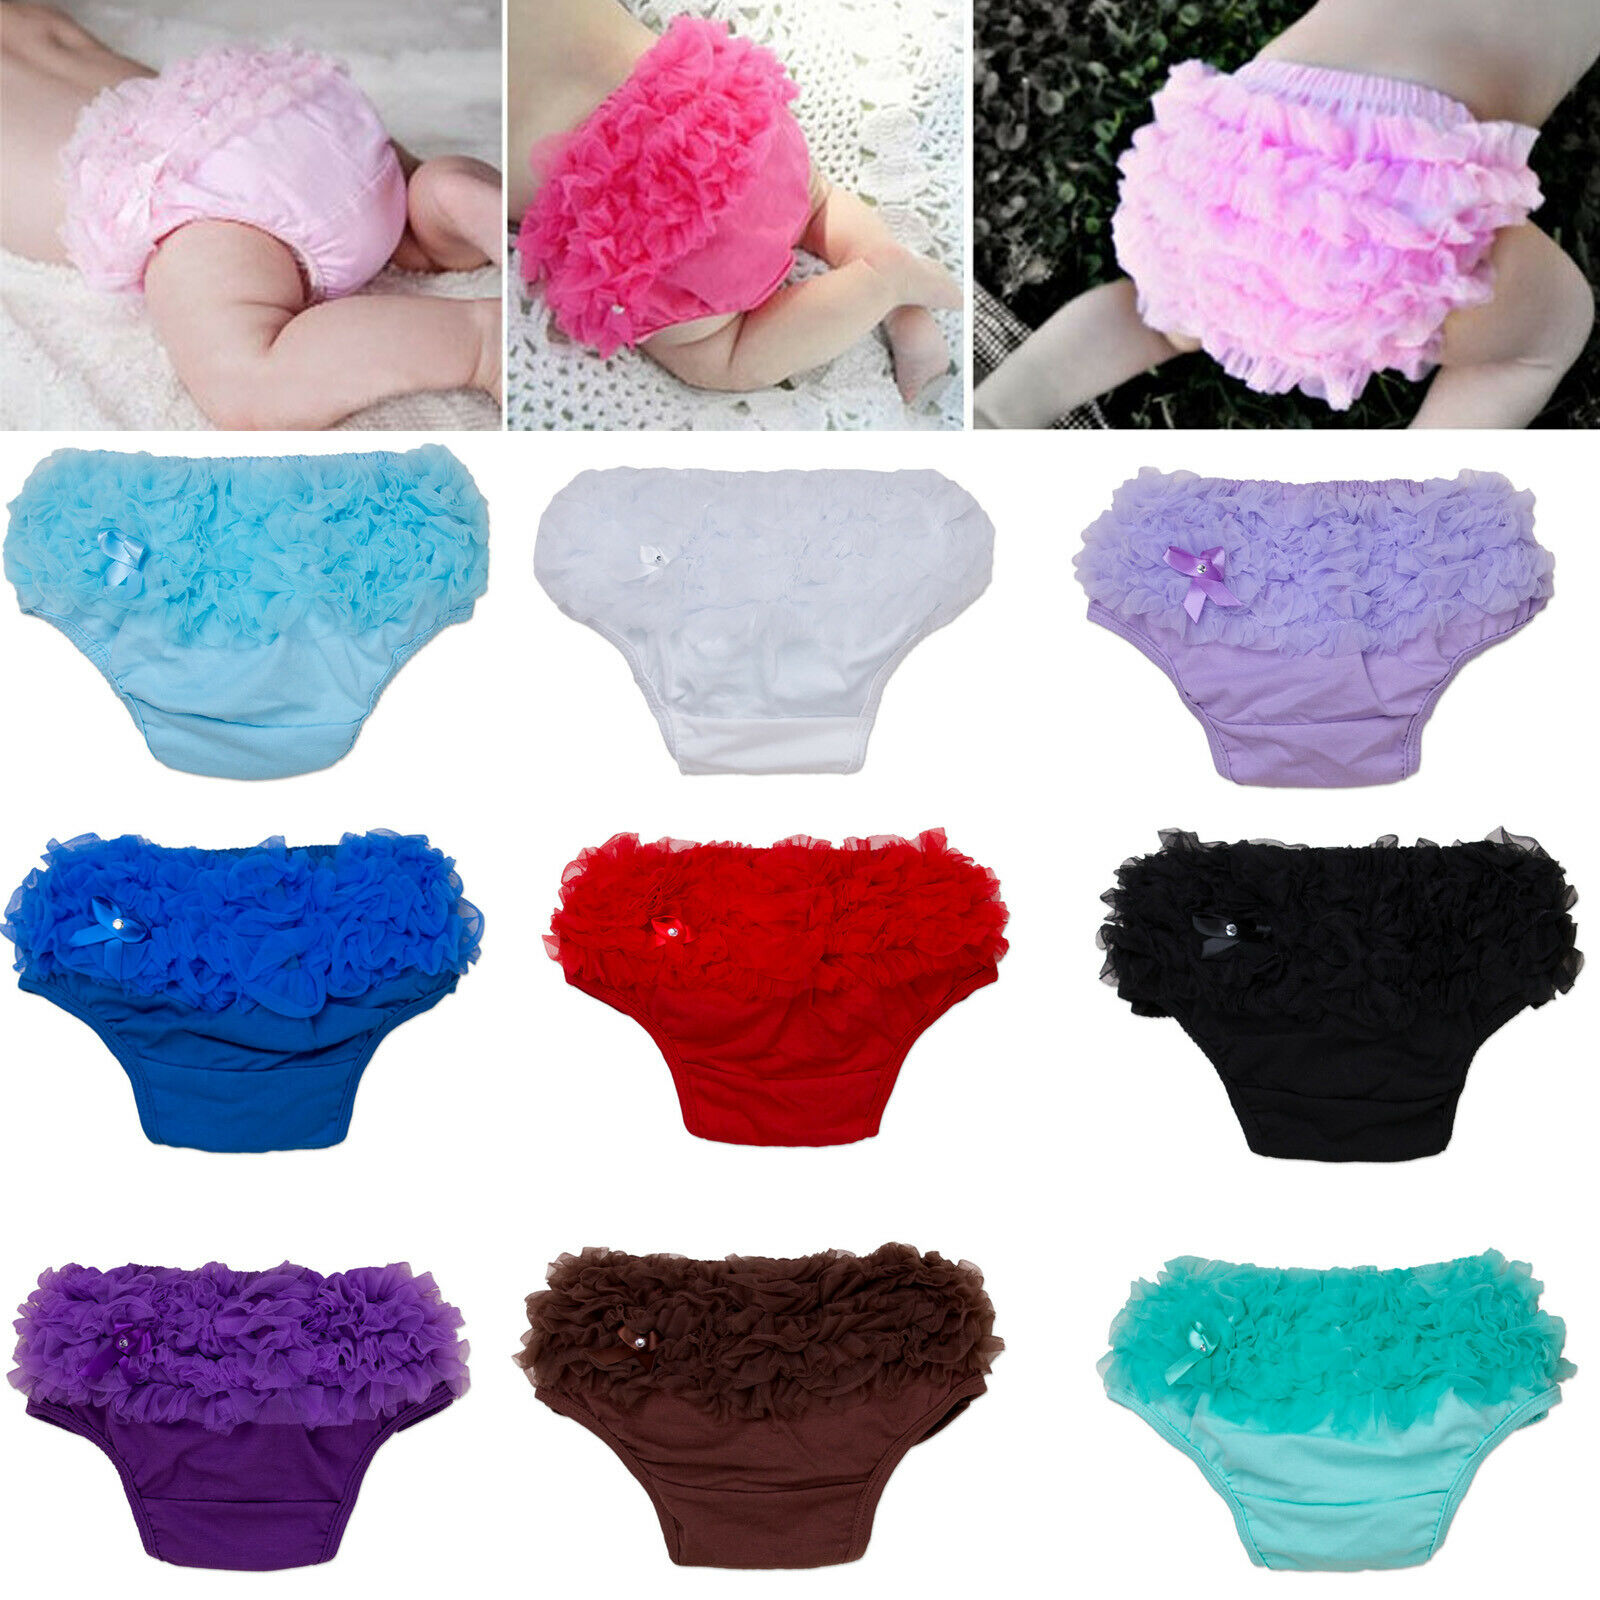 Toddler Baby Girl Ruffle Pp Pants Bow Bloomers Panty Diaper Nappy Cover Panties